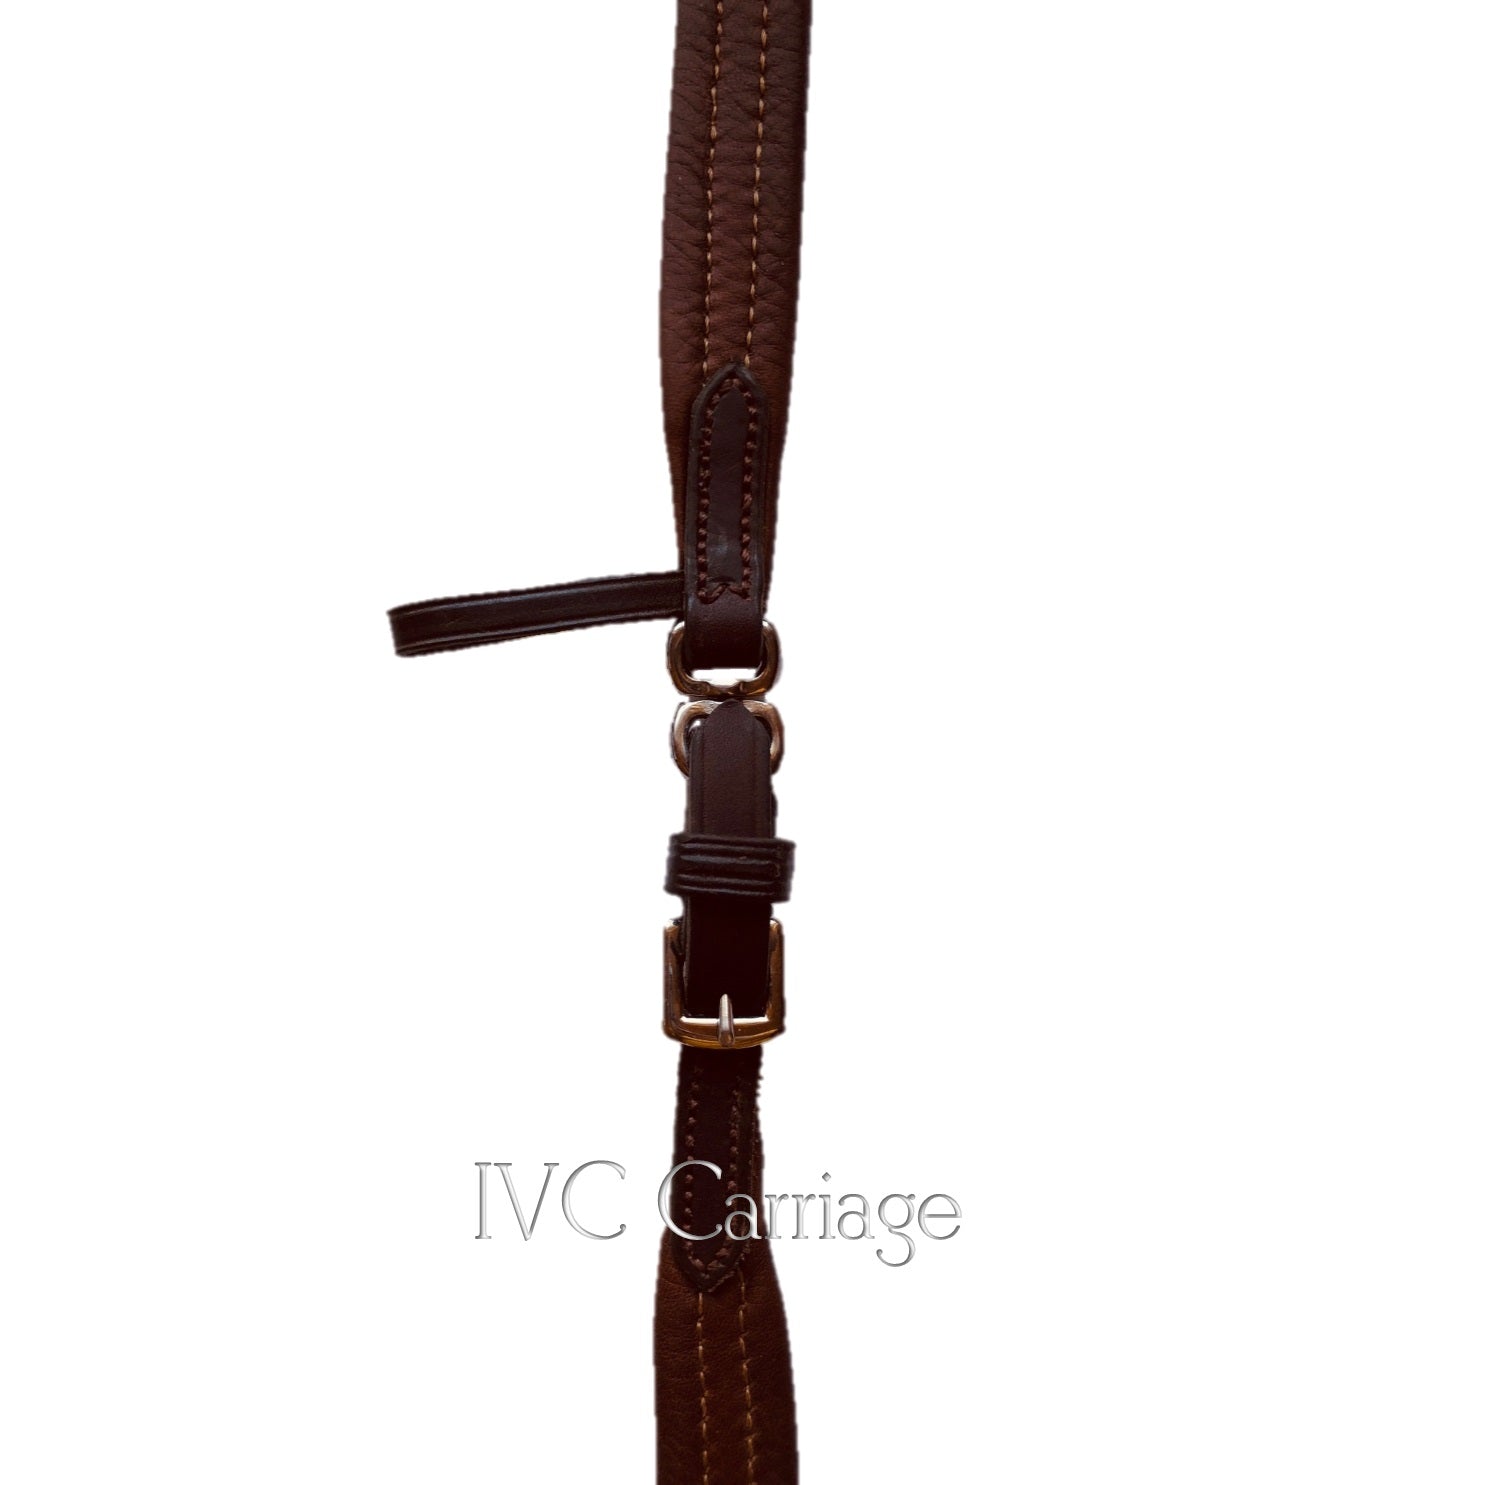 Bowman Ultimate Leather Carriage Reins | IVC Carriage